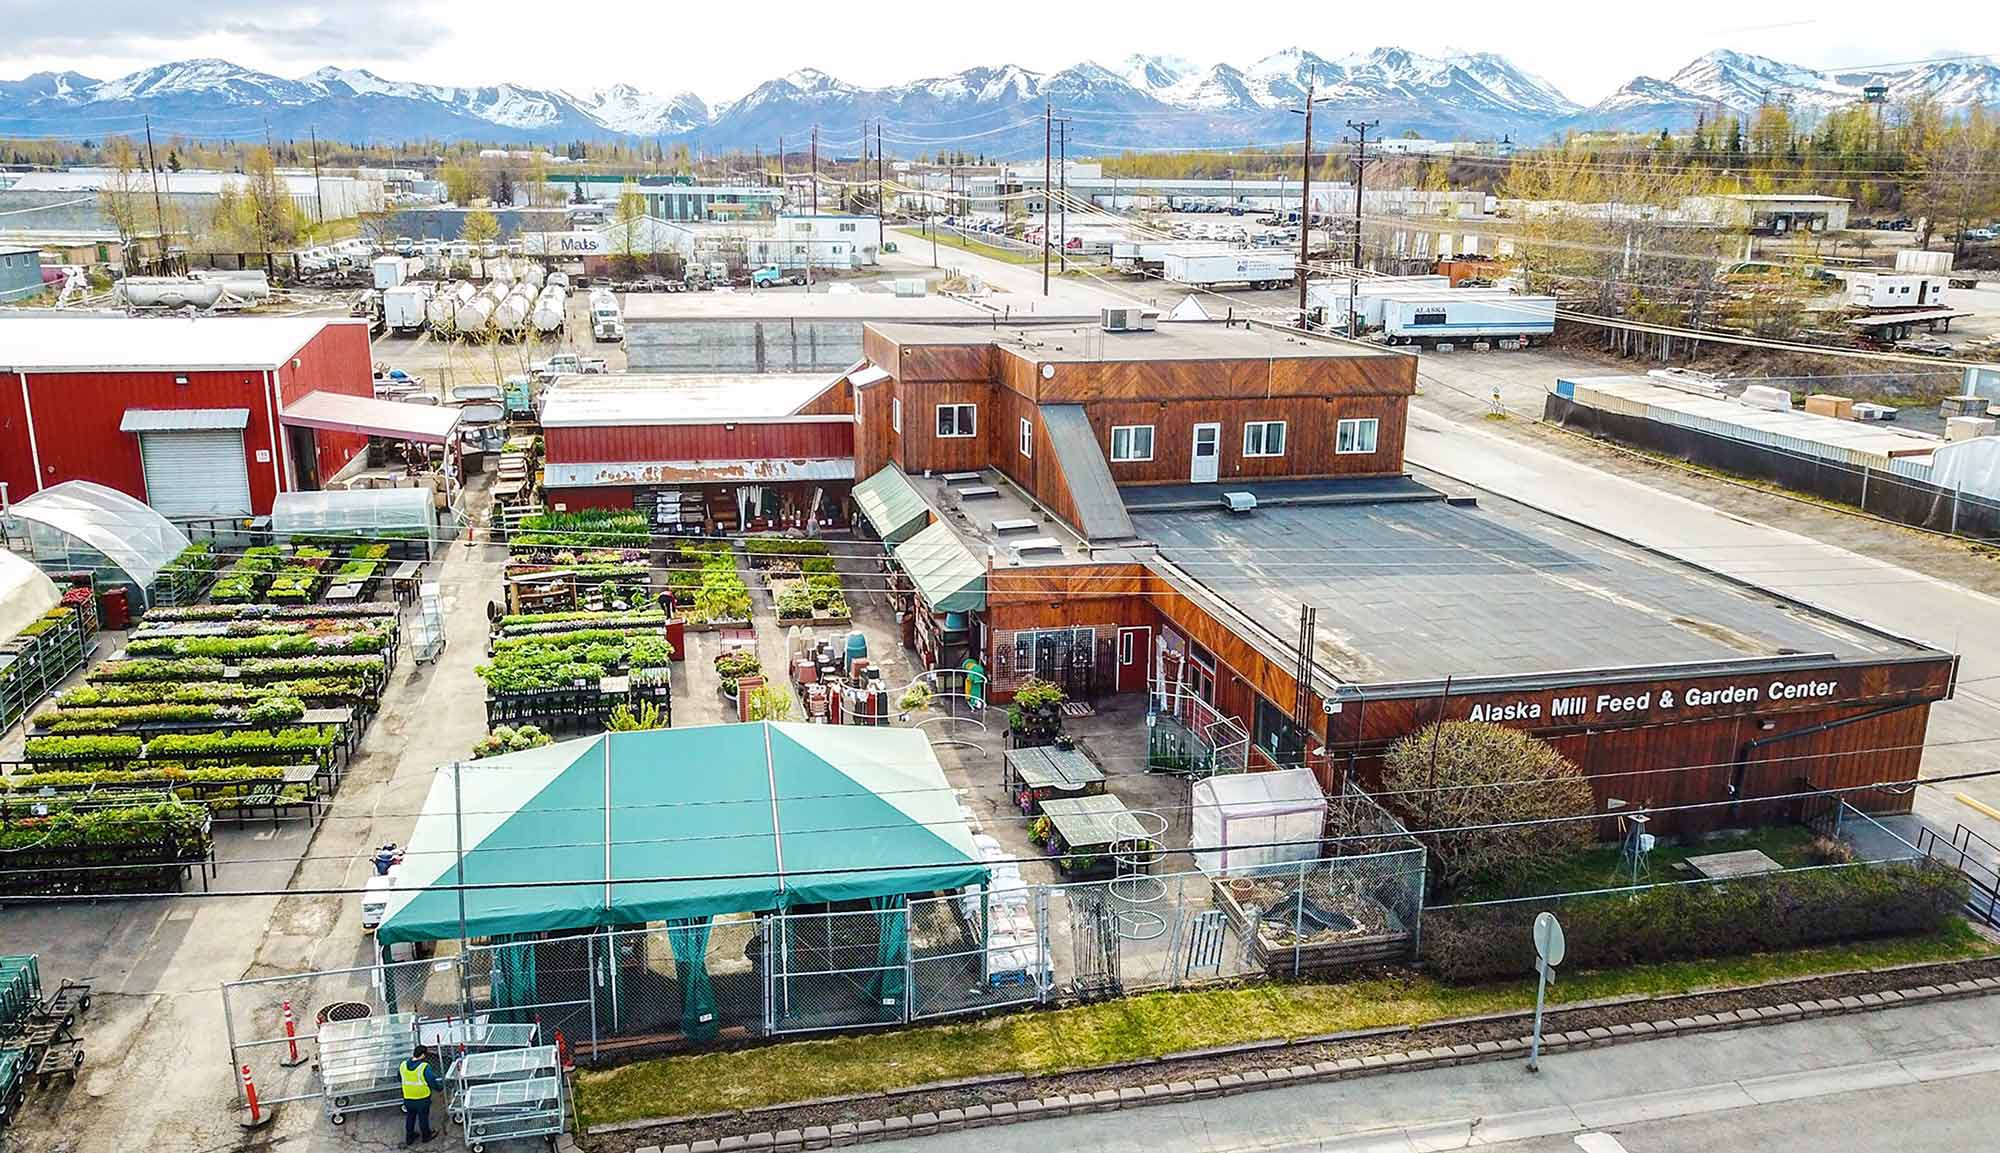 Arial view of Alaska Mill Feed store showing a garden center in the back